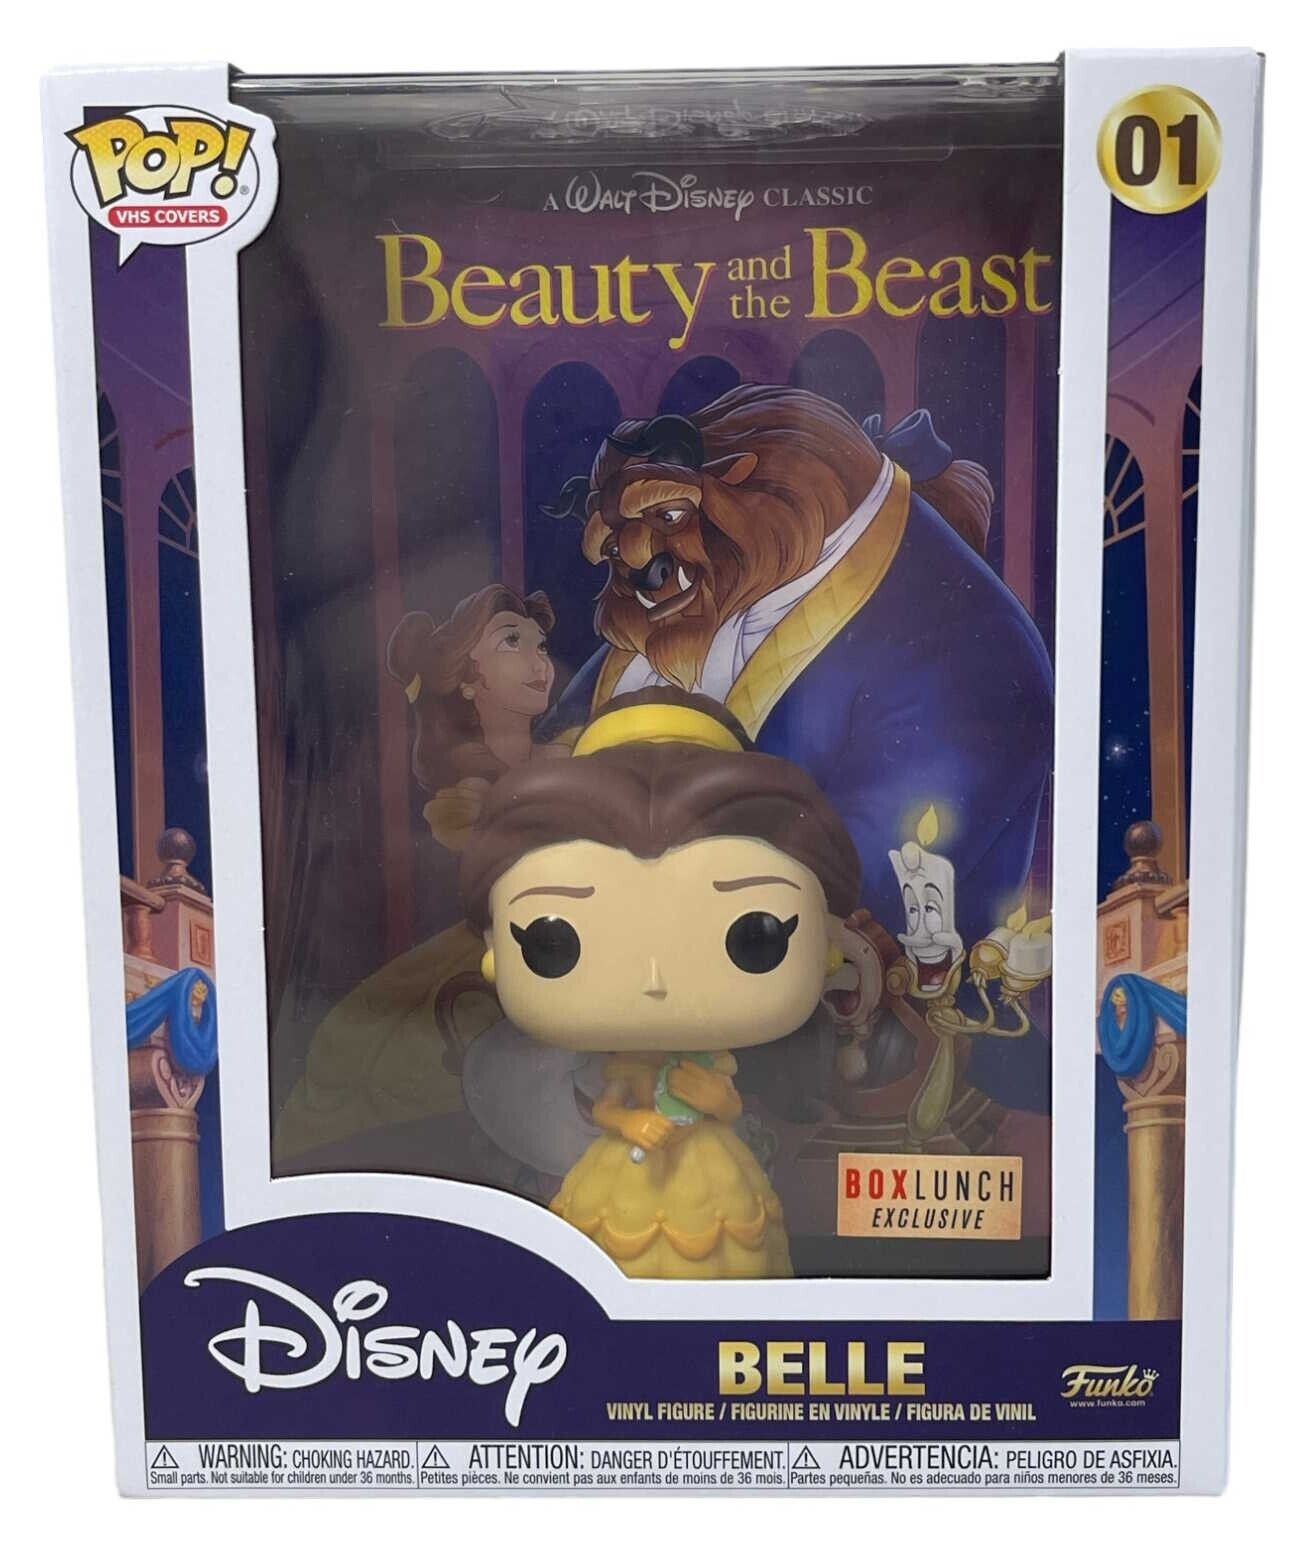 2021 FUNKO POP VHS COVERS Box Lunch Exclusive BELLE 01 Vinyl Figure NEW/SEALED